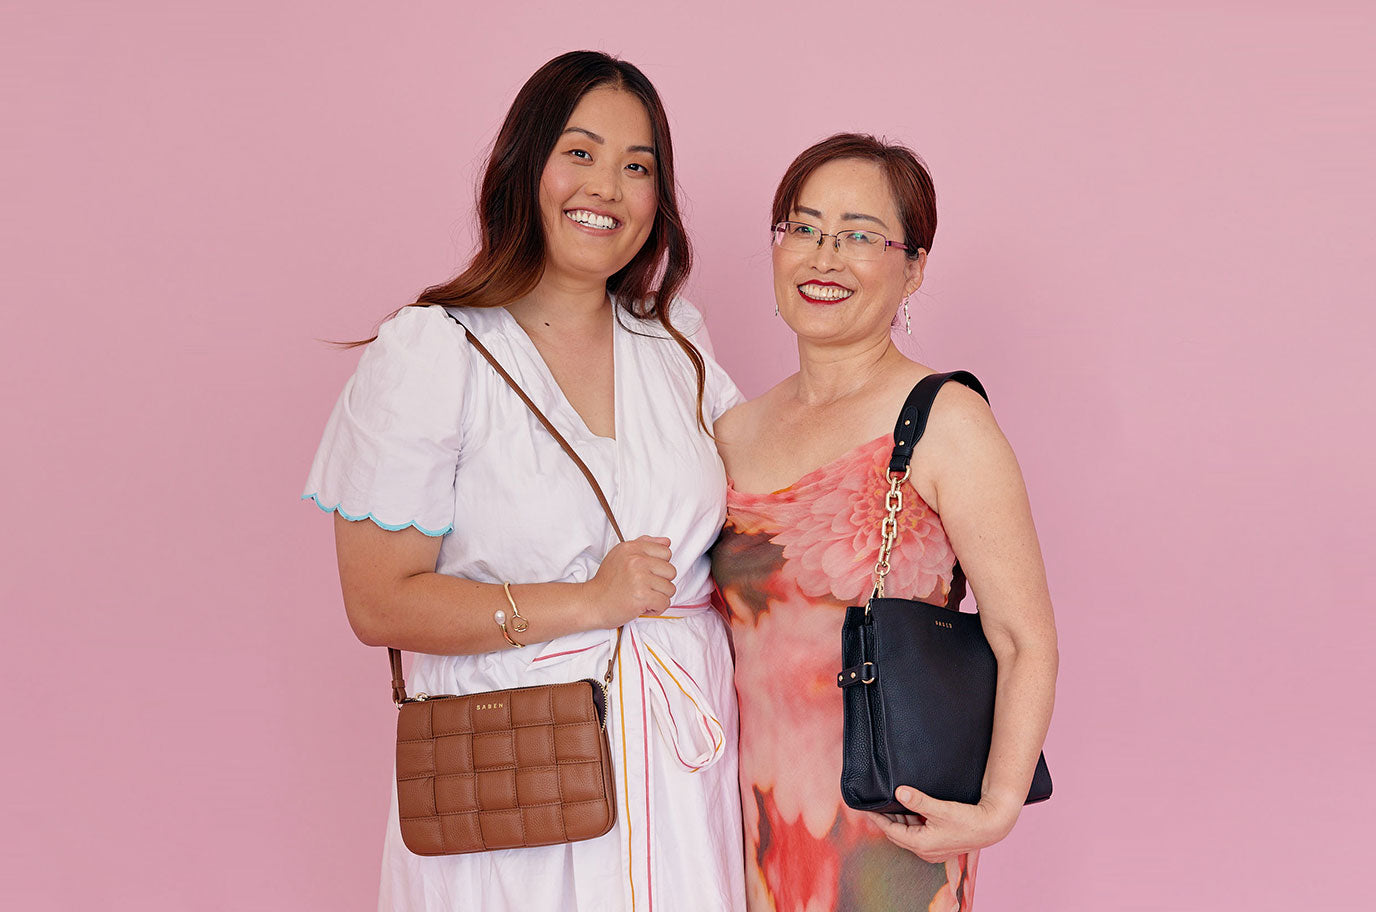 saejung and mum sonia wearing Bea black and big sis tilly tan woven for saben mothers day campaign